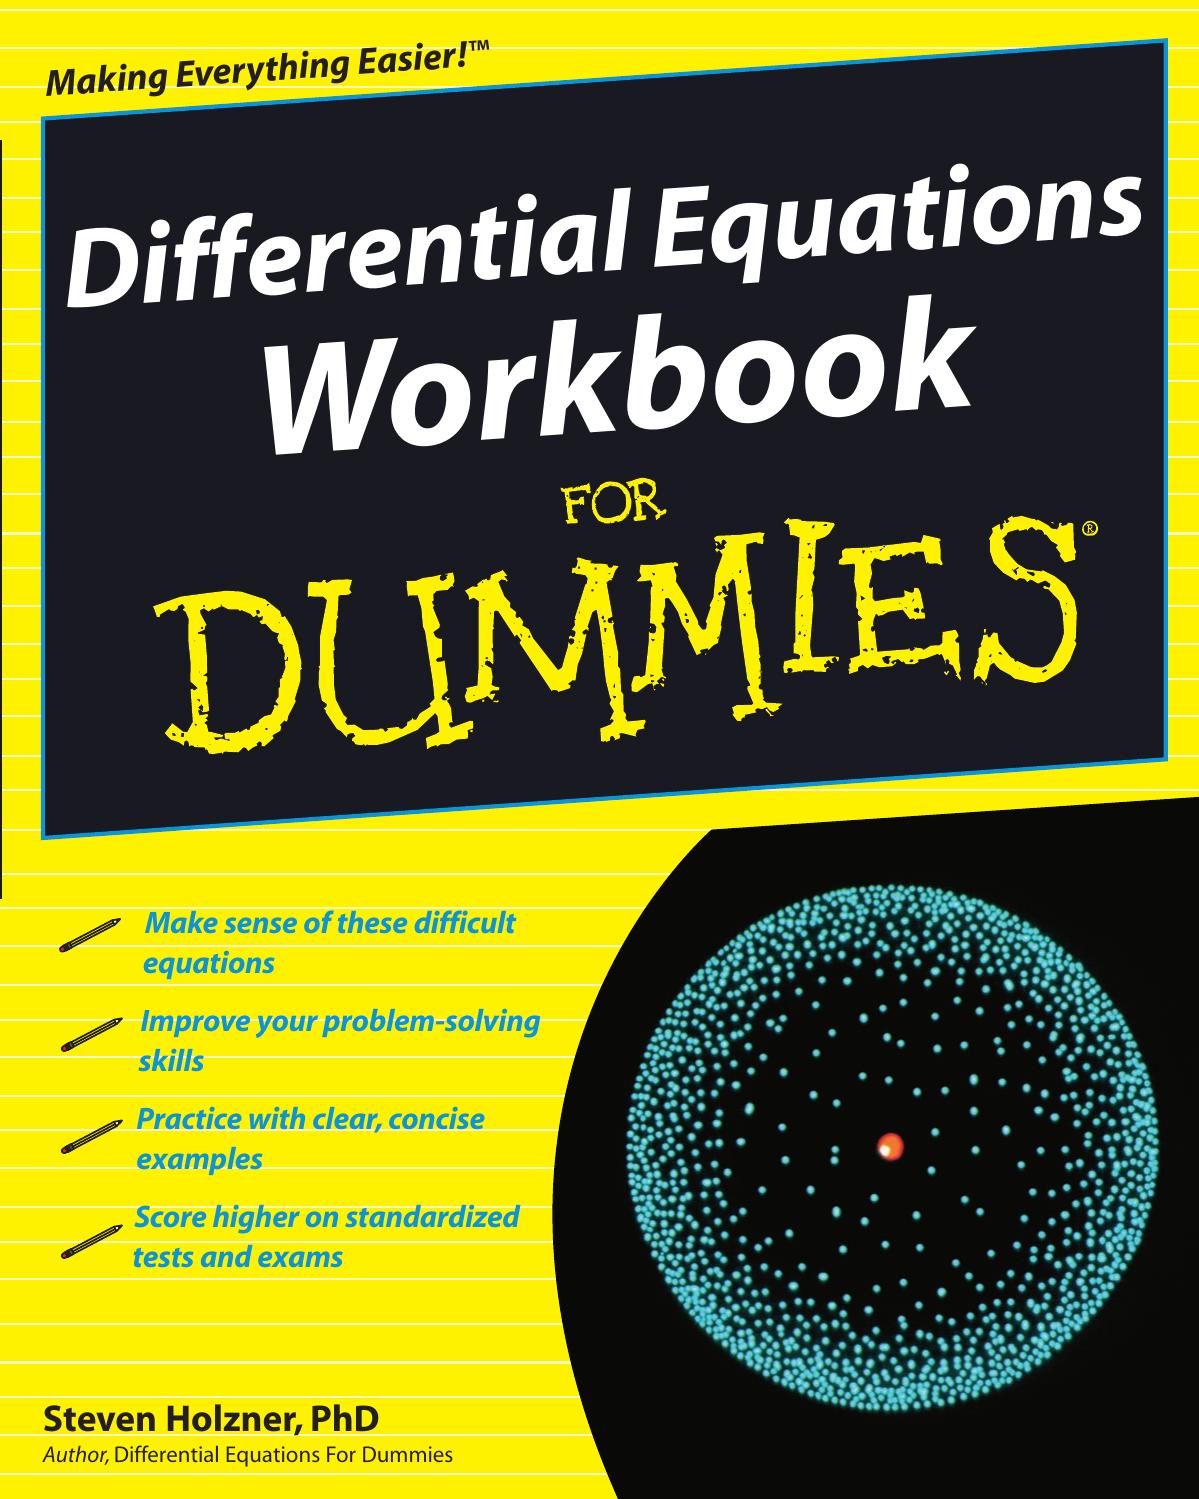 Differential Equations workbook for dummies 2009